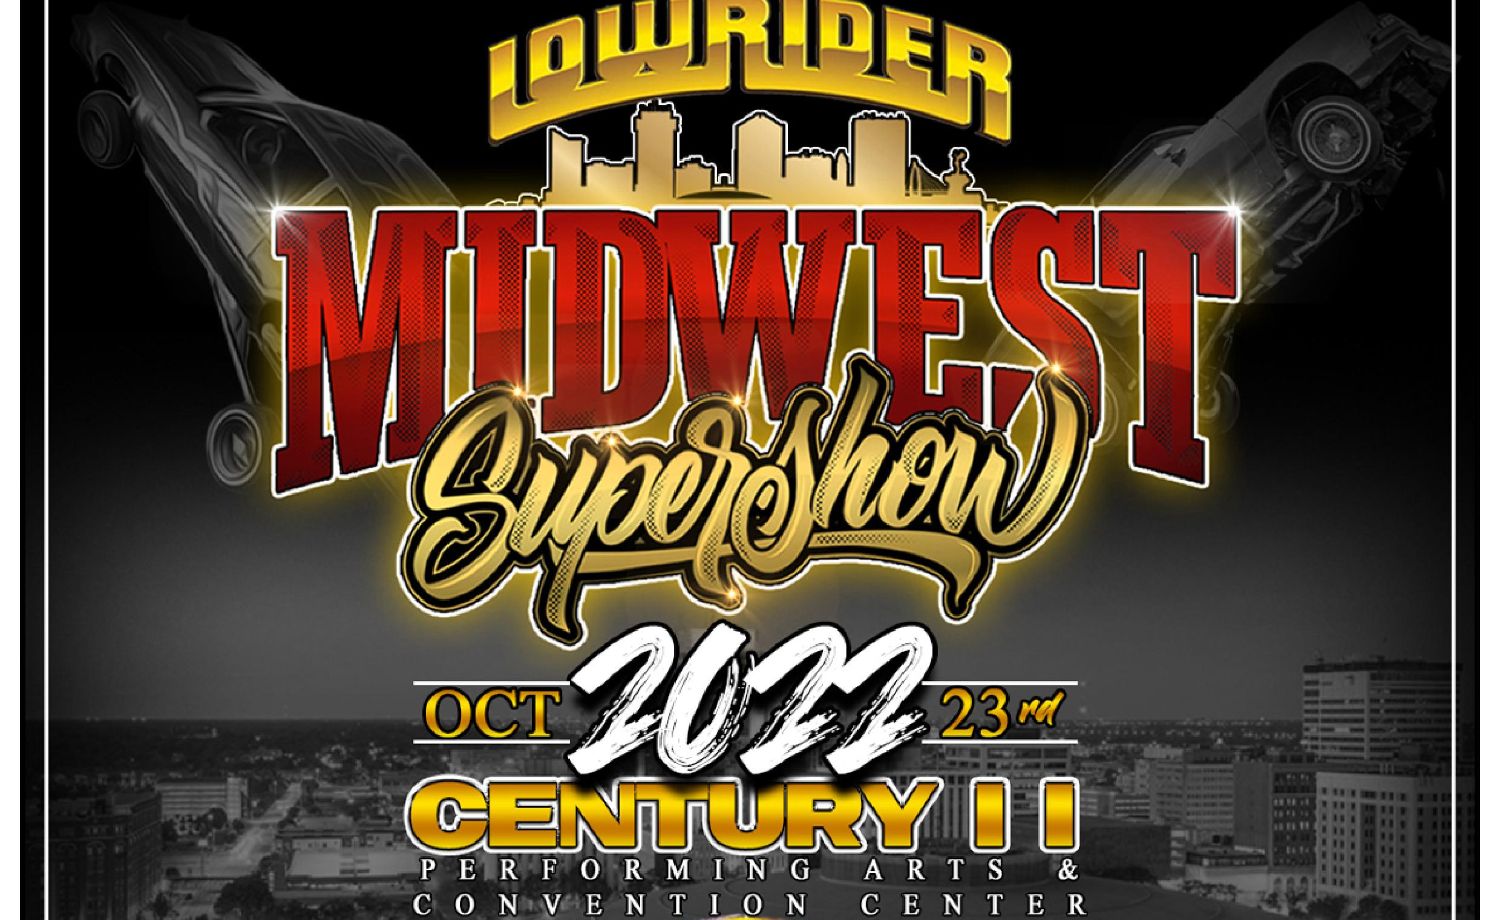 Midwest Super Show 2022 Oct 23